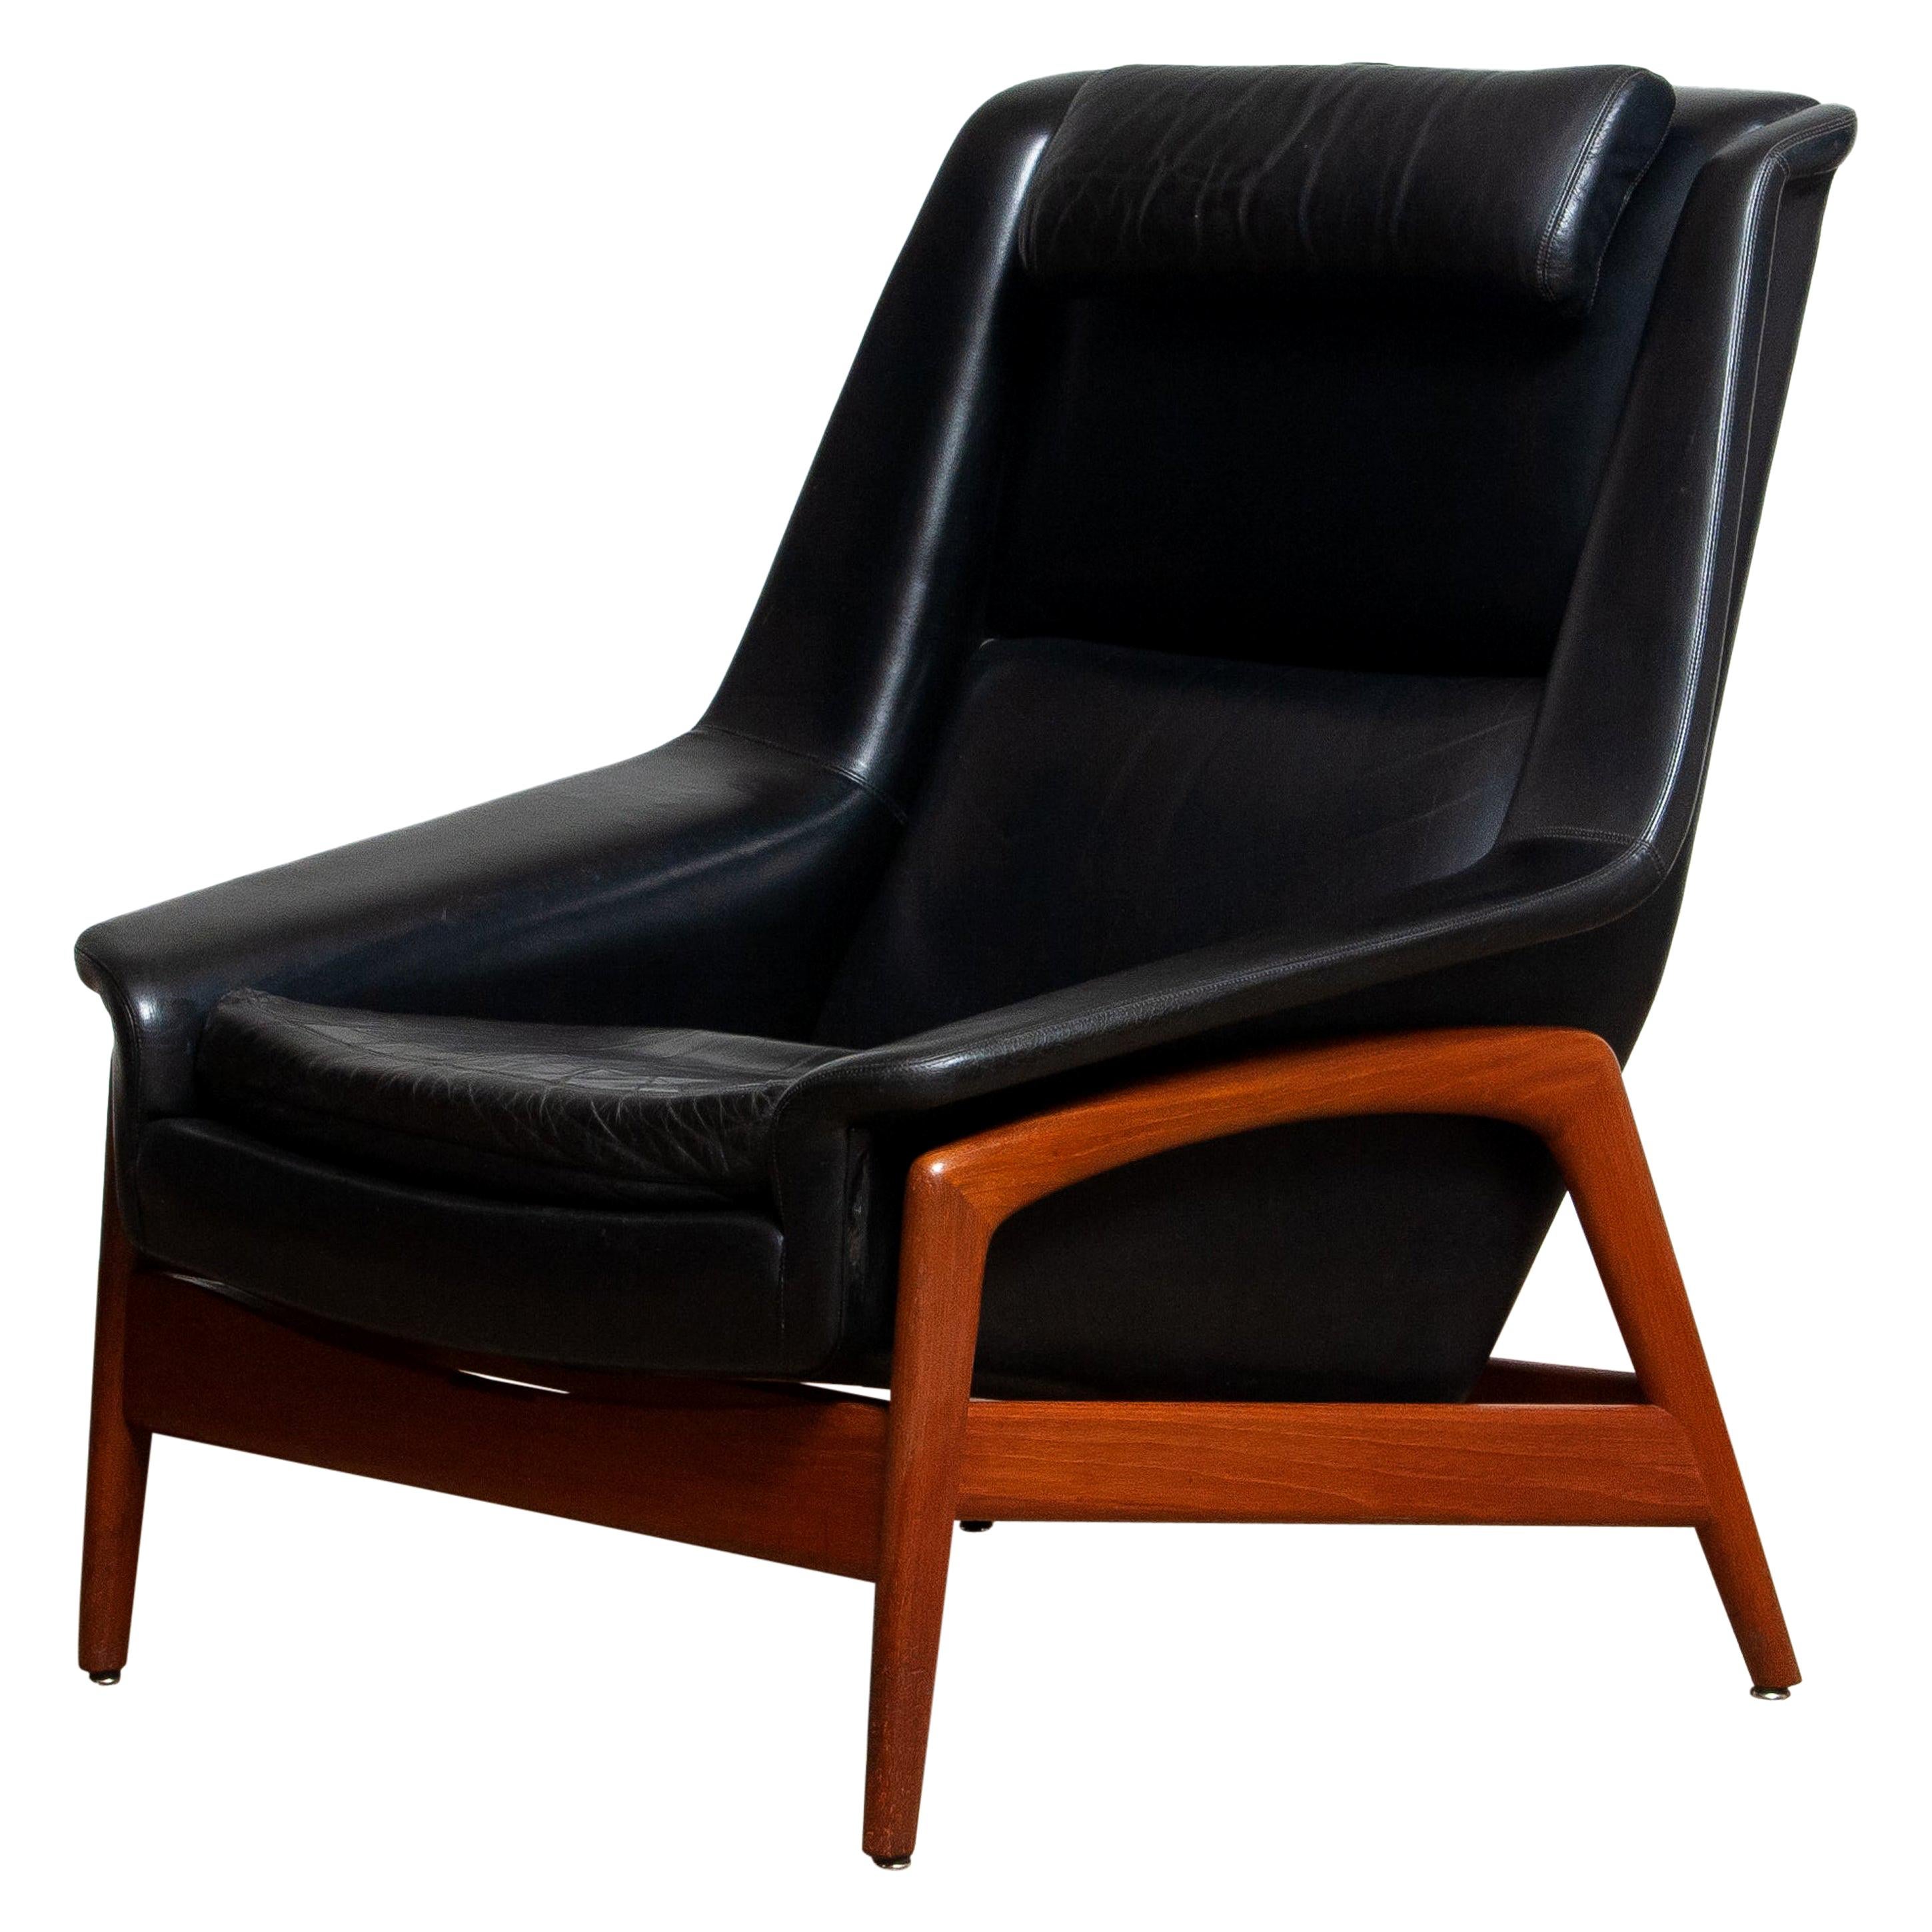 Stunning easy / lounge chair in teak and upholstered in black leather by Folke Ohlsson for DUX, Sweden,
Model; Profil
Overall in good condition.